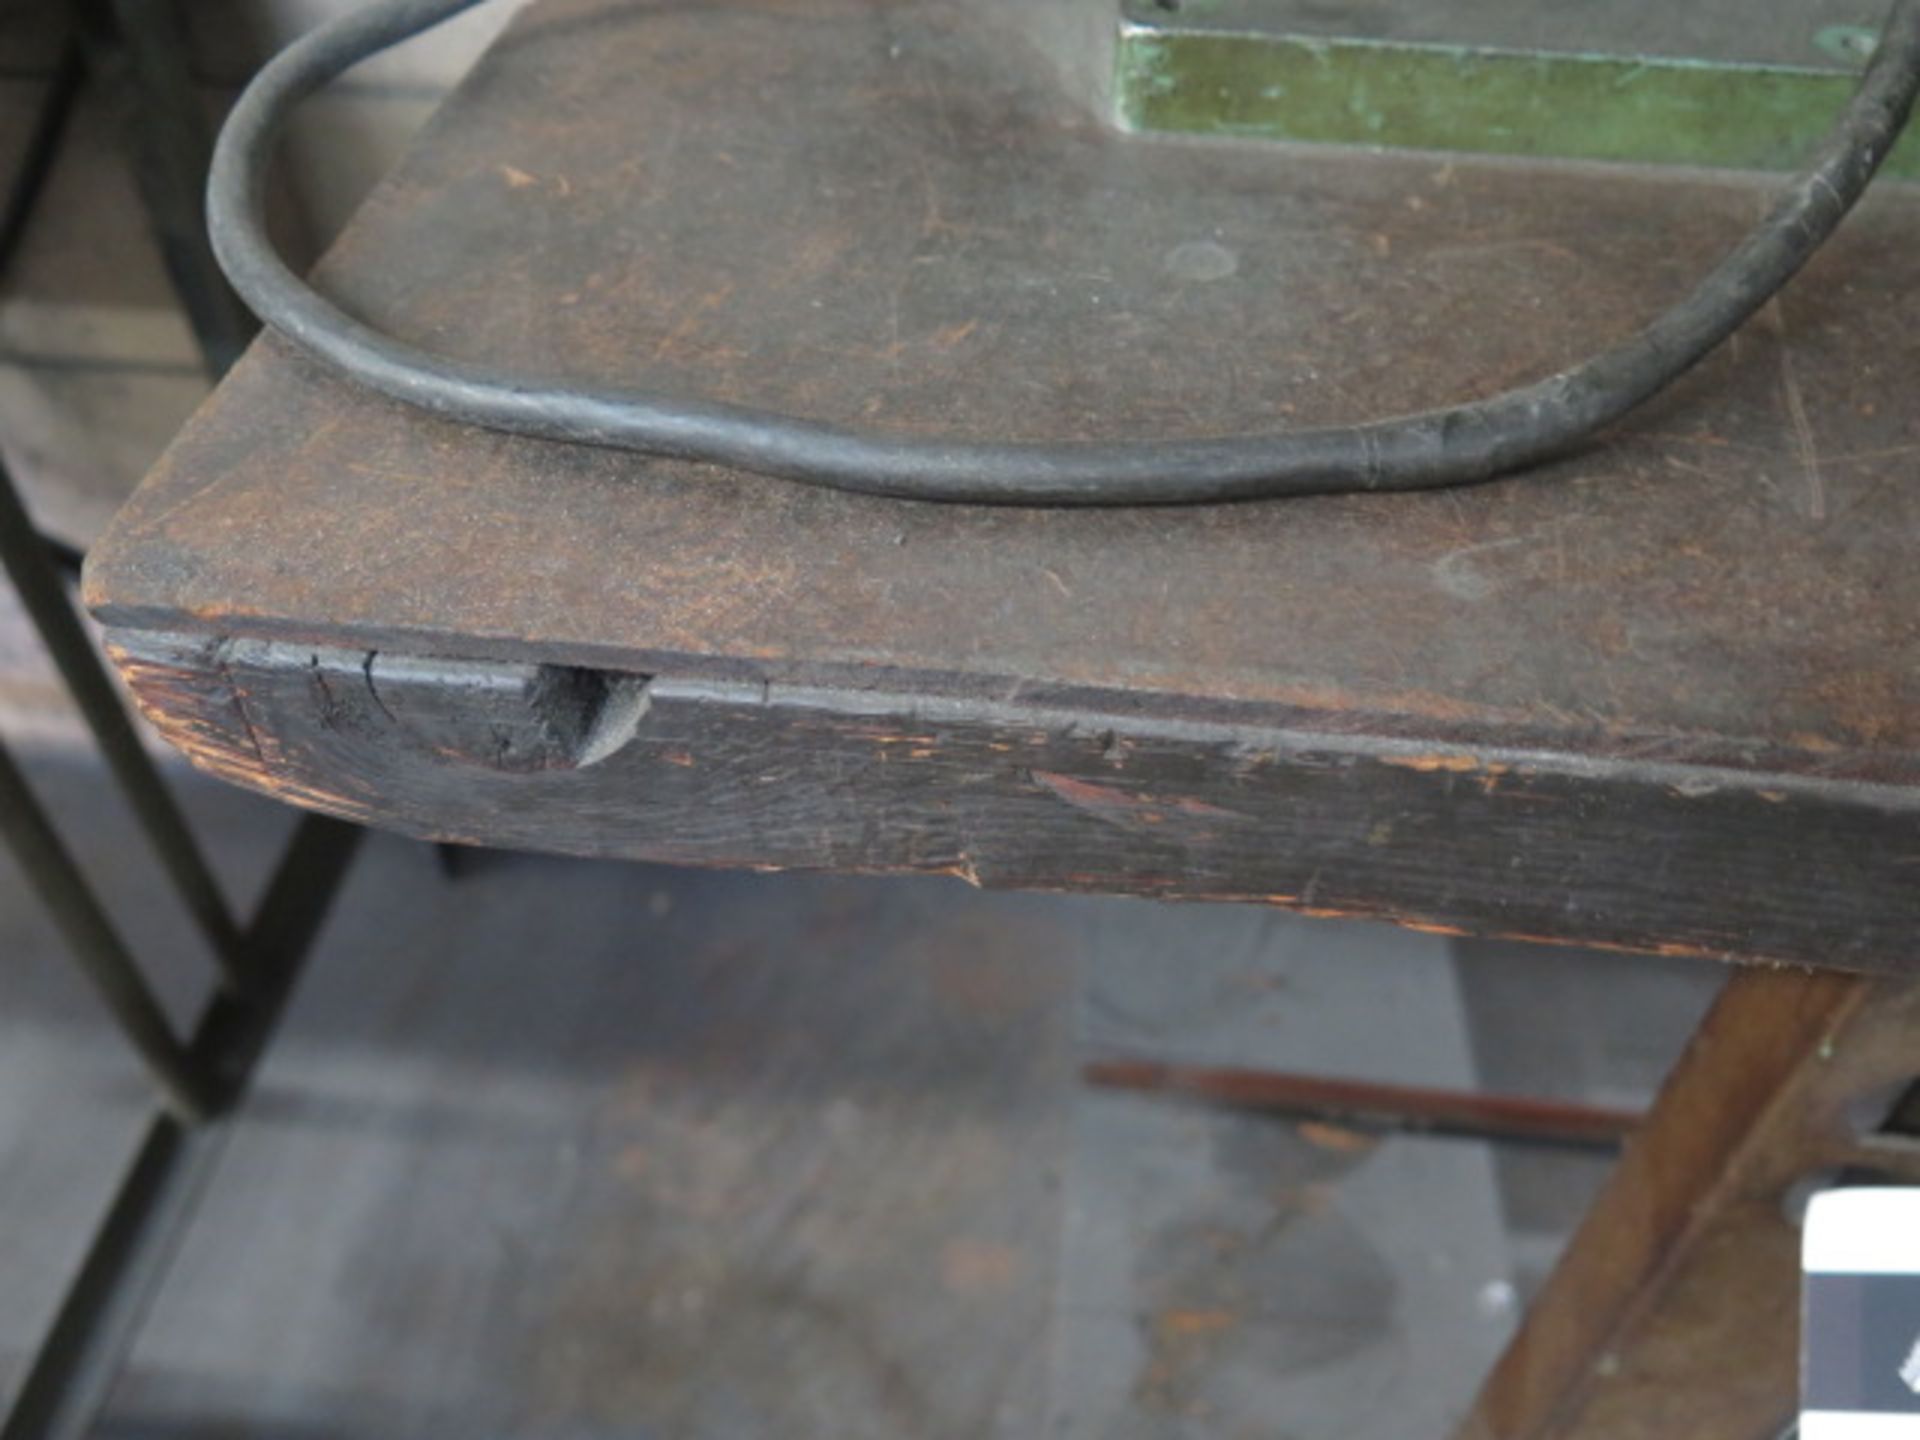 Work Bench (SOLD AS-IS - NO WARRANTY) - Image 2 of 2